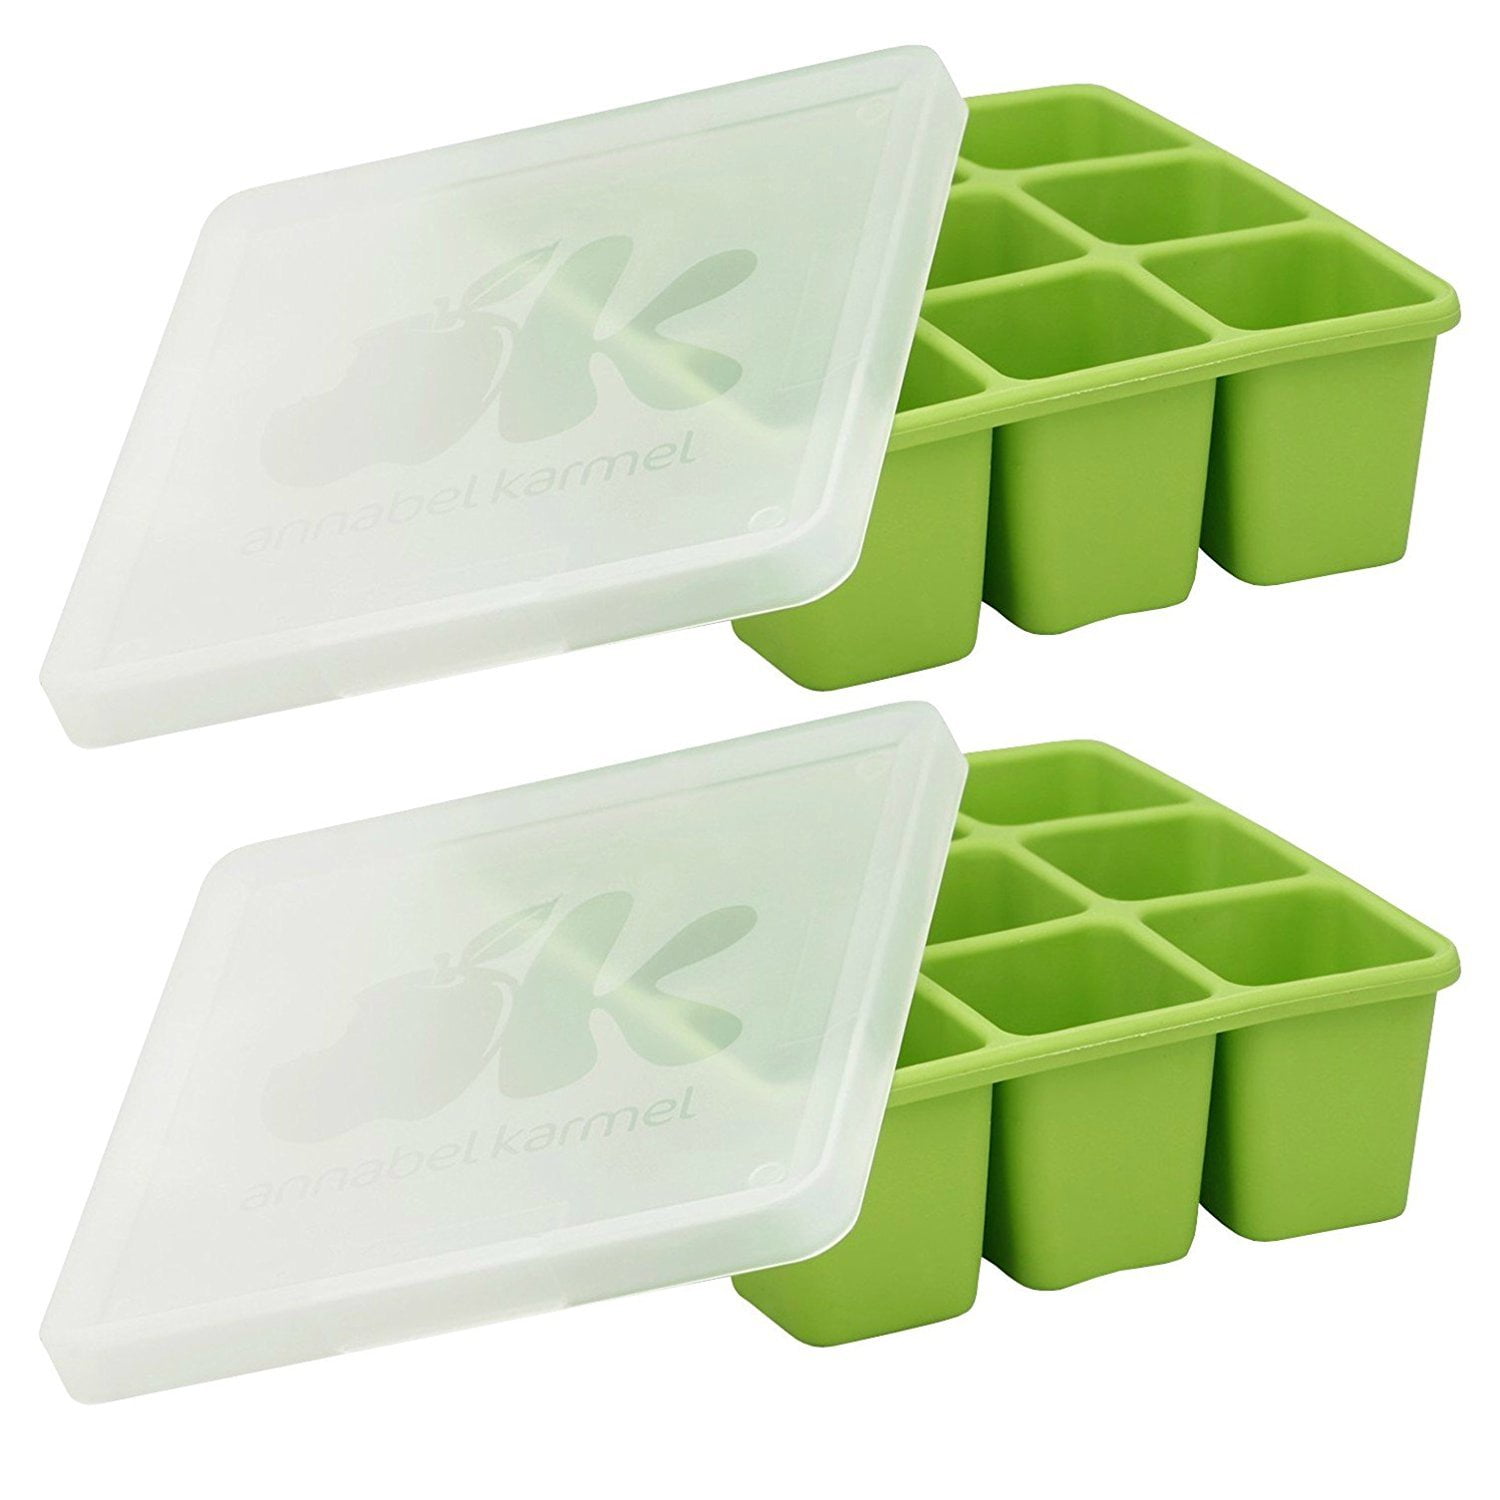 NUK Homemade Baby Food Flexible Freezer Tray and Lid Set, 2 Pack –